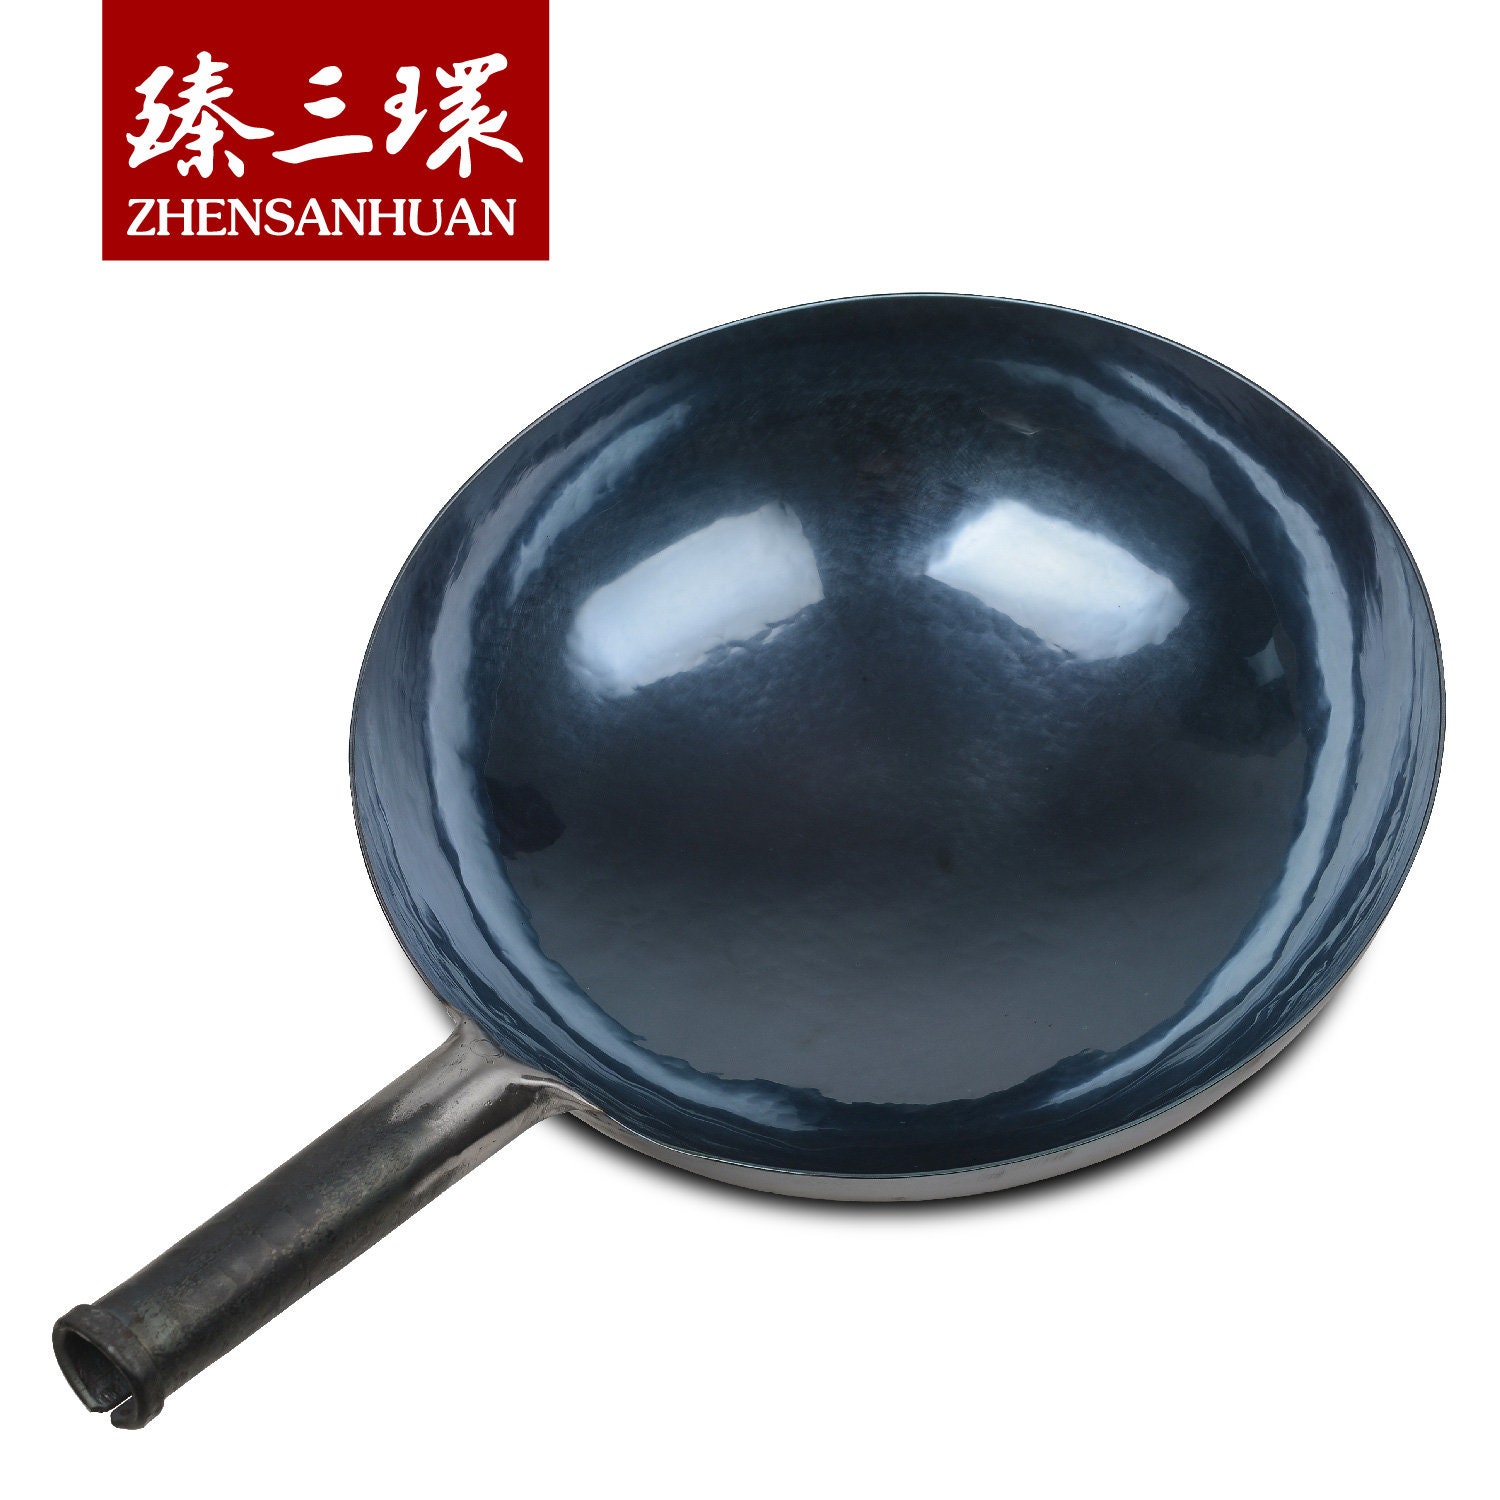 34cm Heavy Iron Wok Traditional Hand-forged Cast Iron Wok Non